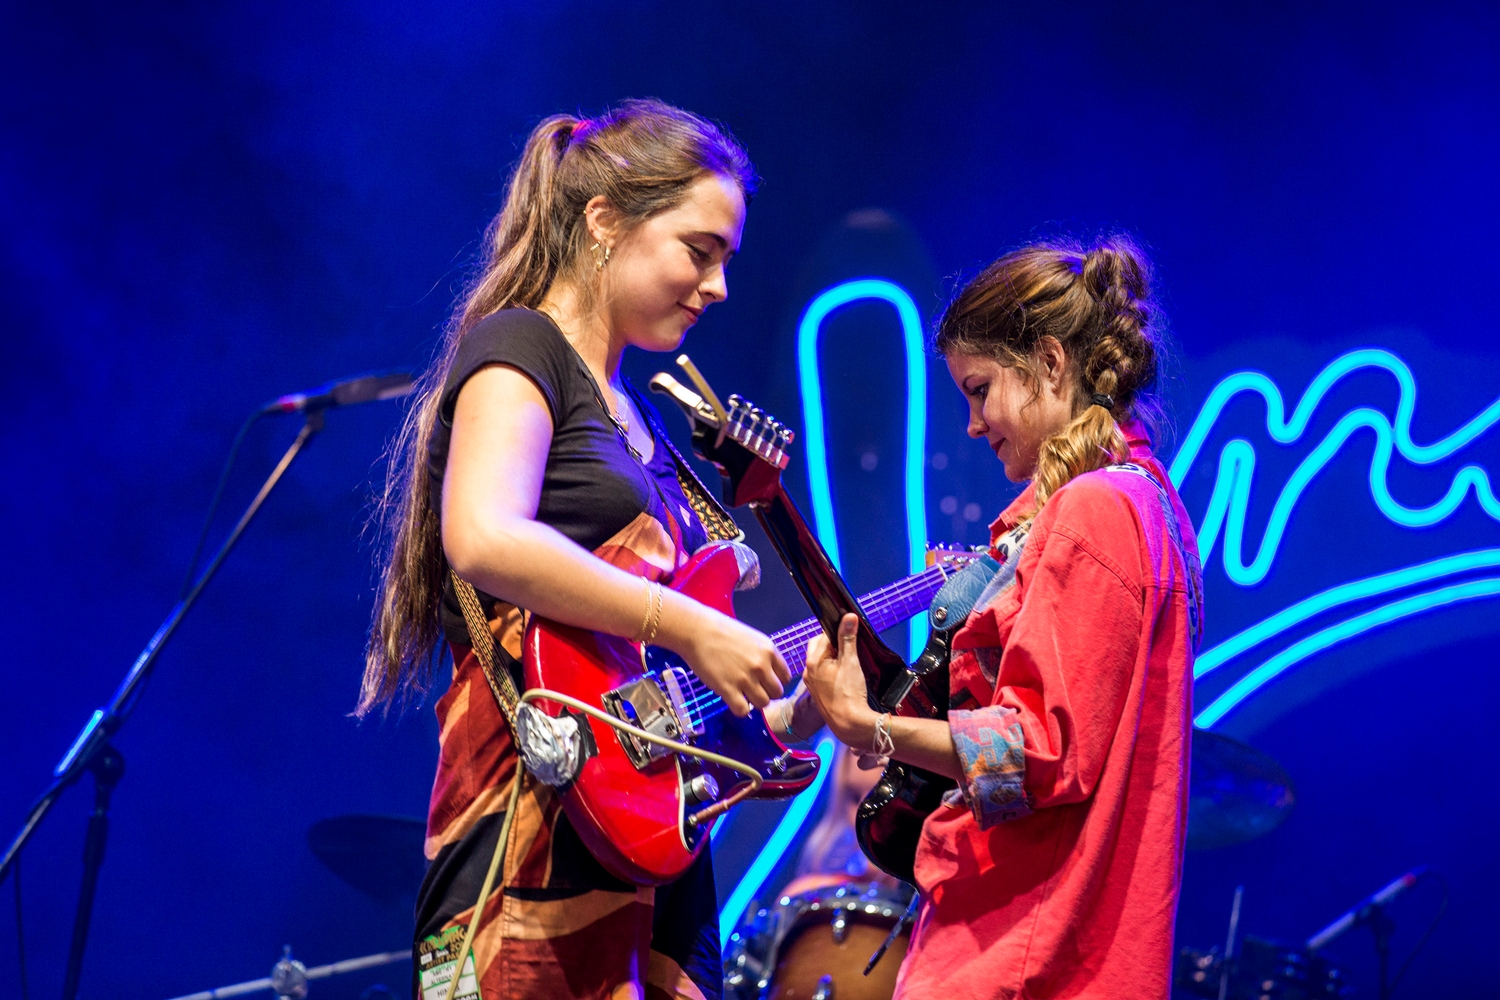 Hinds are right at home at Reading 2016